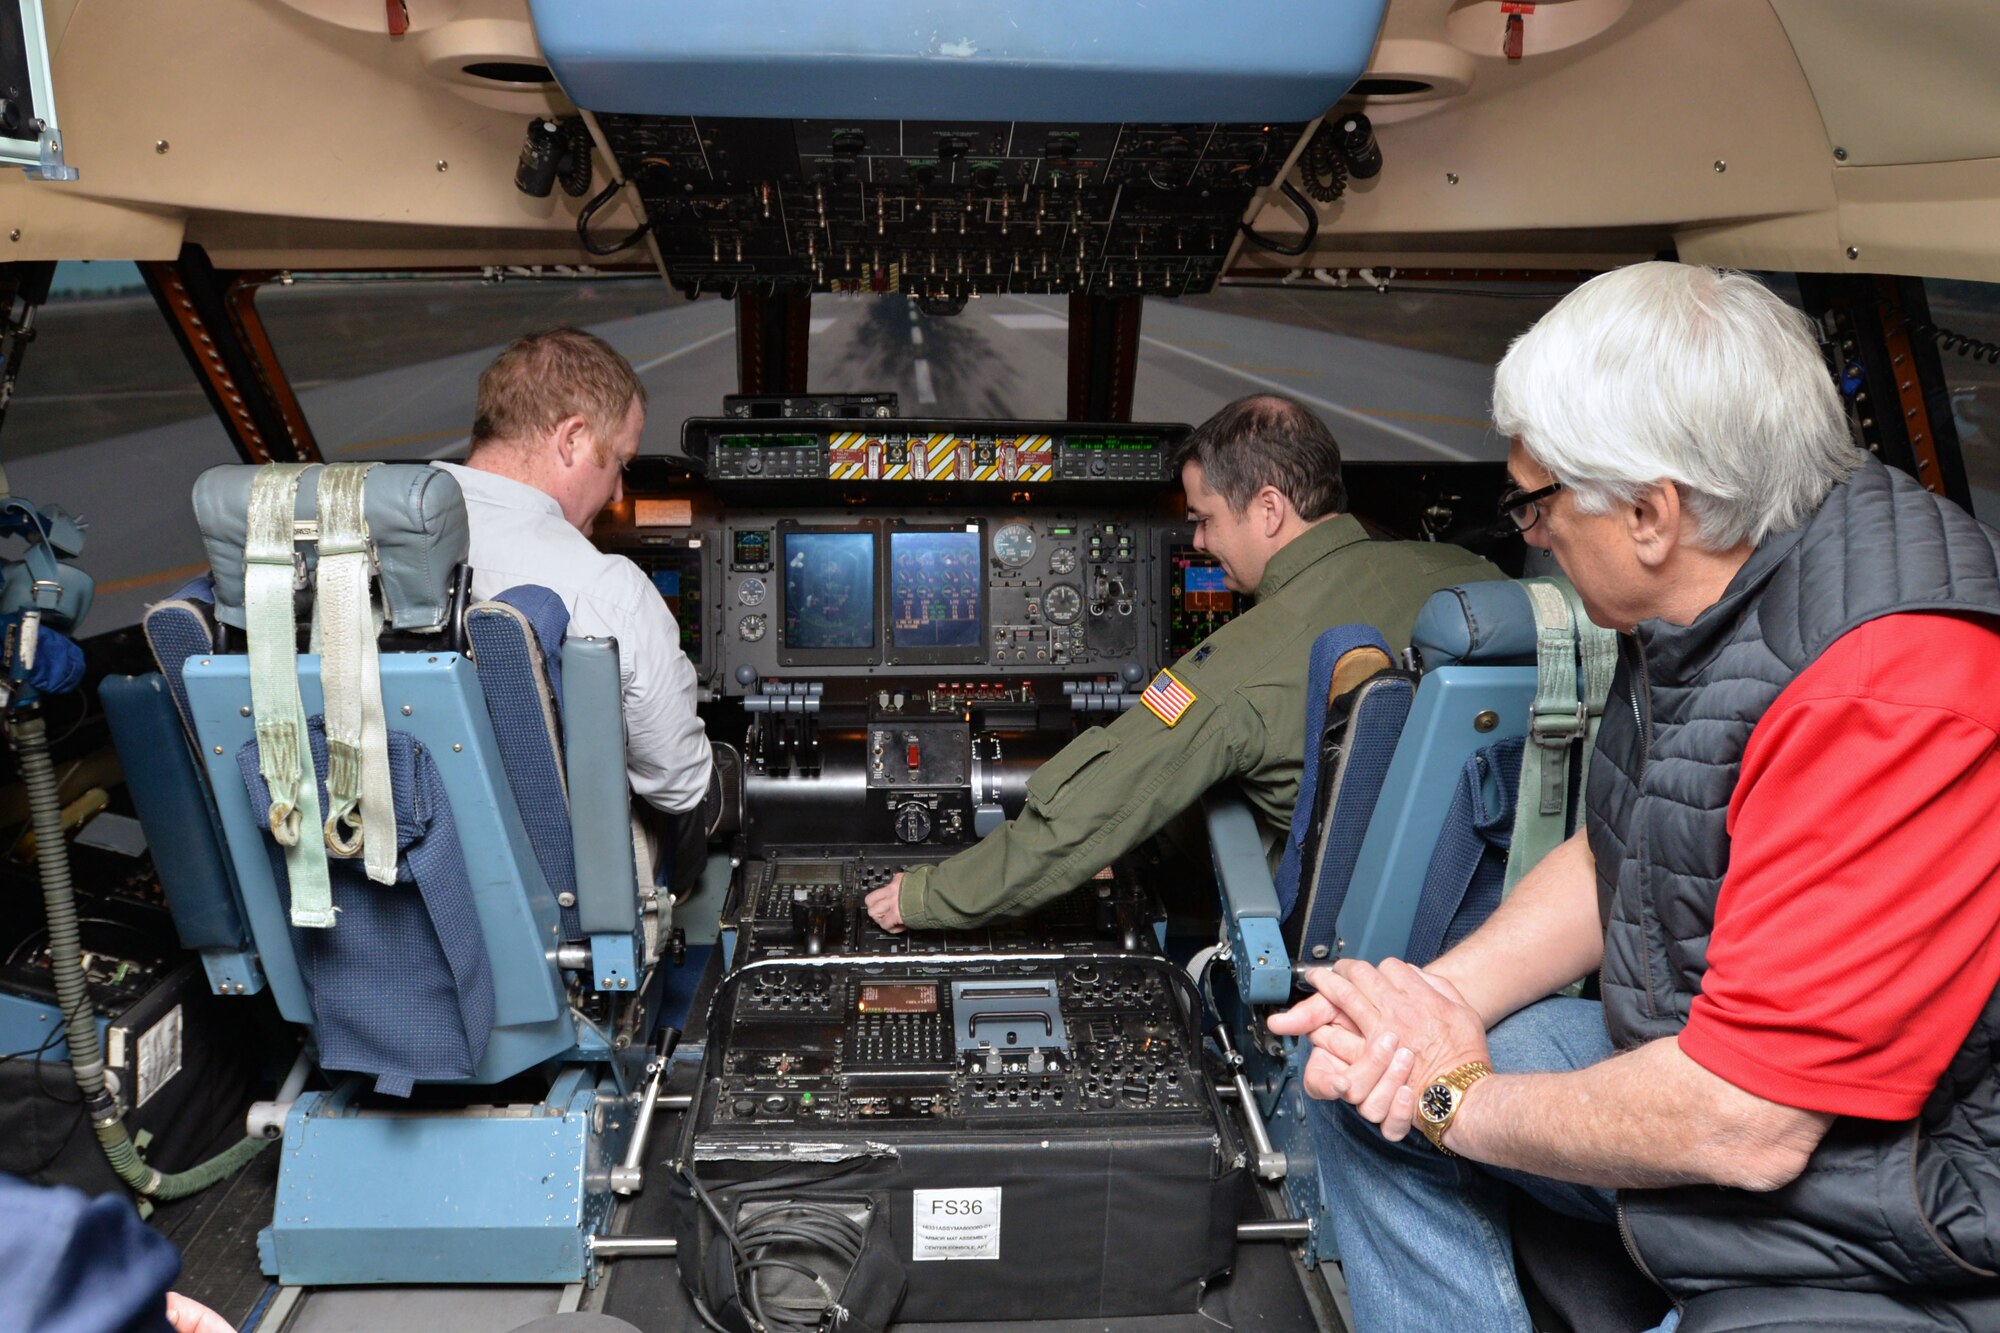 Lt. Col. Ryan A. Clark, 356th Airlift Squadron flight instructor, describes C-5M Super Galaxy flight deck controls to Rich Weimert, San Antonio Missions Baseball director of baseball operations (left), and Craig Veltri, Office Resource Center president March 7, 2020 at Joint Base San Antonio-Lackland, Texas. Weimert and Veltri are 433rd Airlift Wing honorary commanders, who along with other honorary commanders toured the 433rd Operations Group.